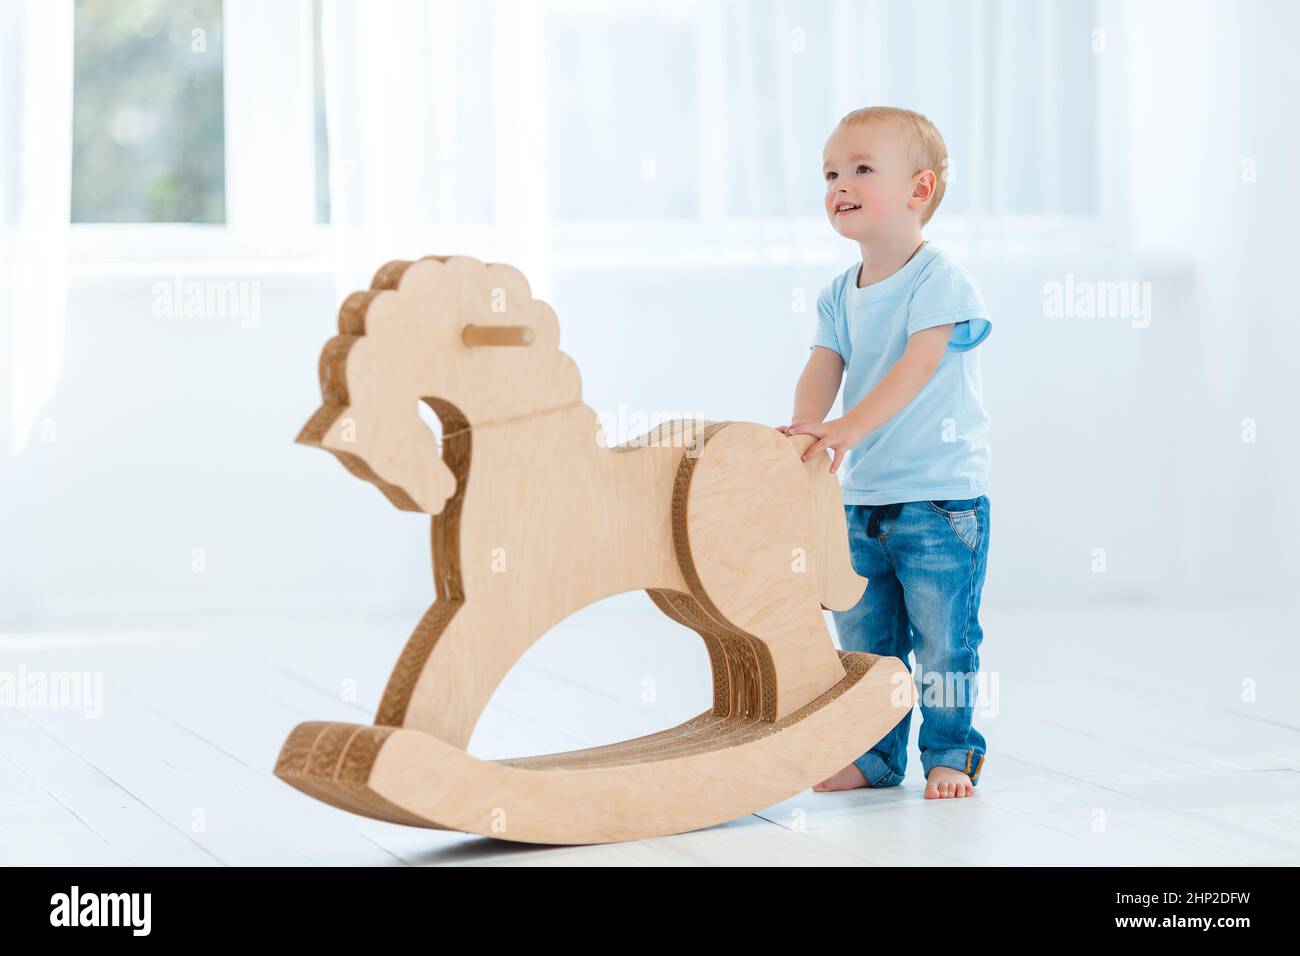 Cute, smiling, white, two years old boy in blue t-shirt and jeans rocking on wooden handmade horse. Little child having fun with pony toy. Concept of Stock Photo